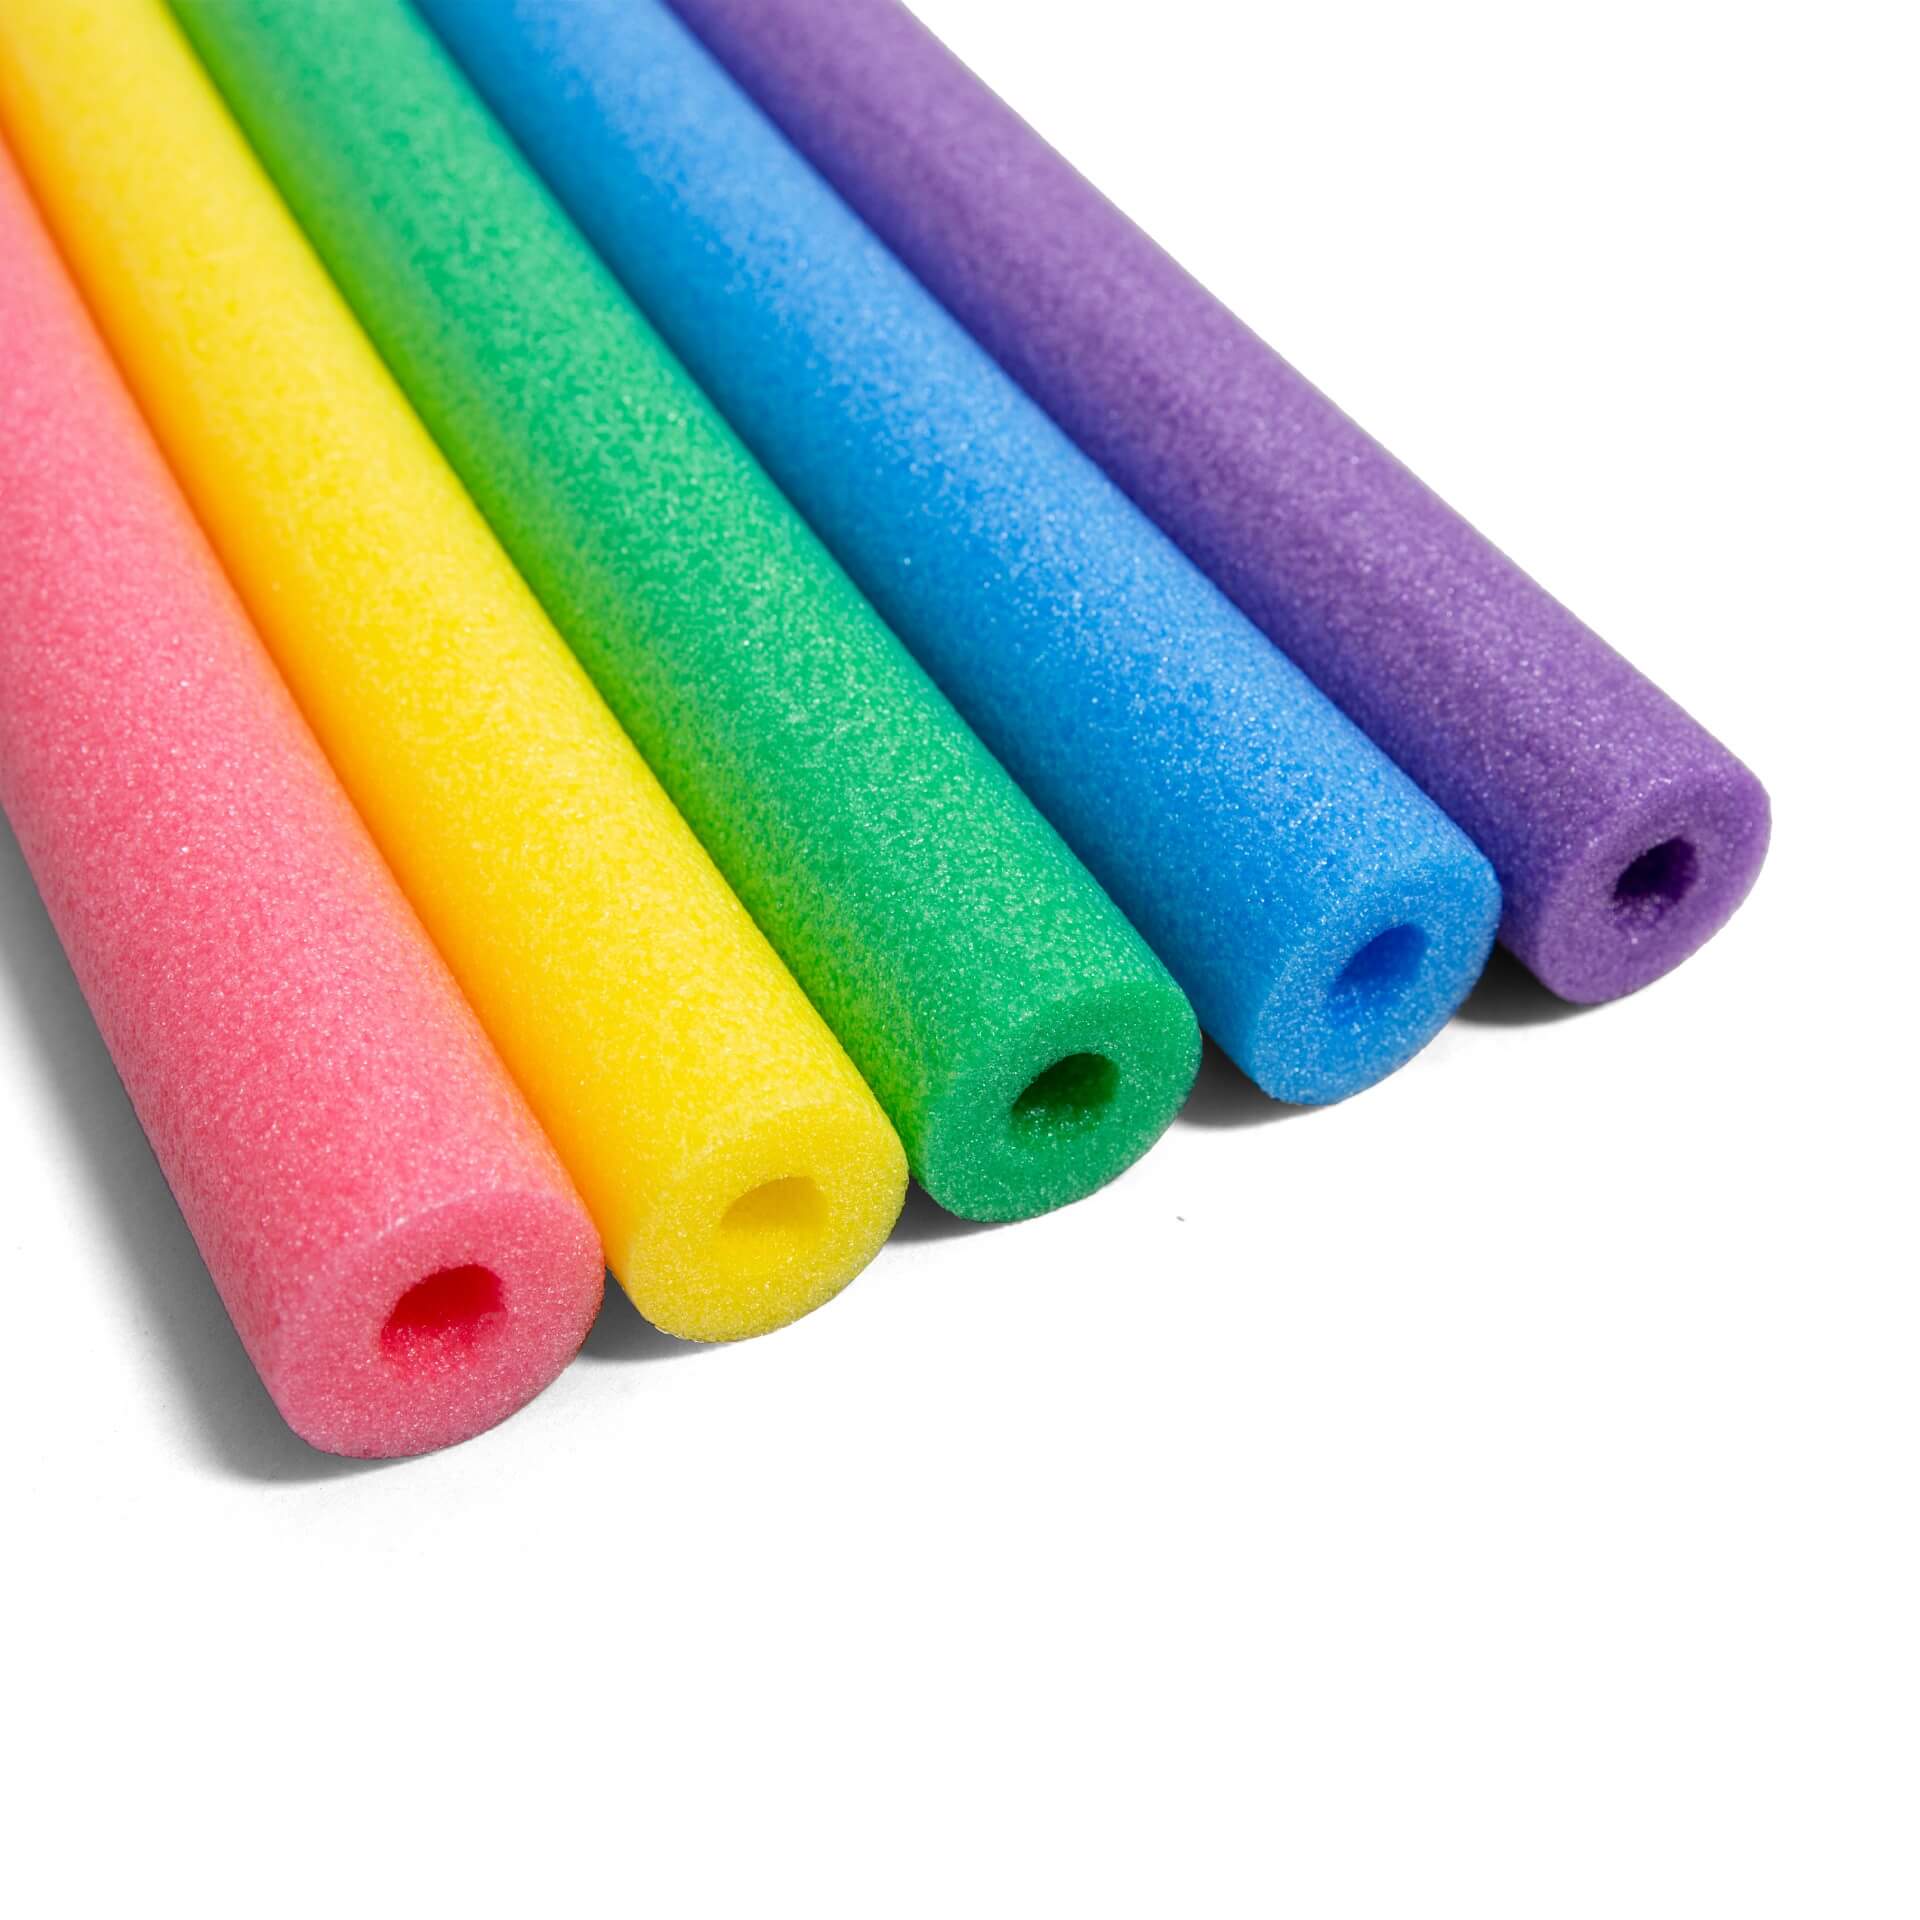 How To Store Pool Noodles